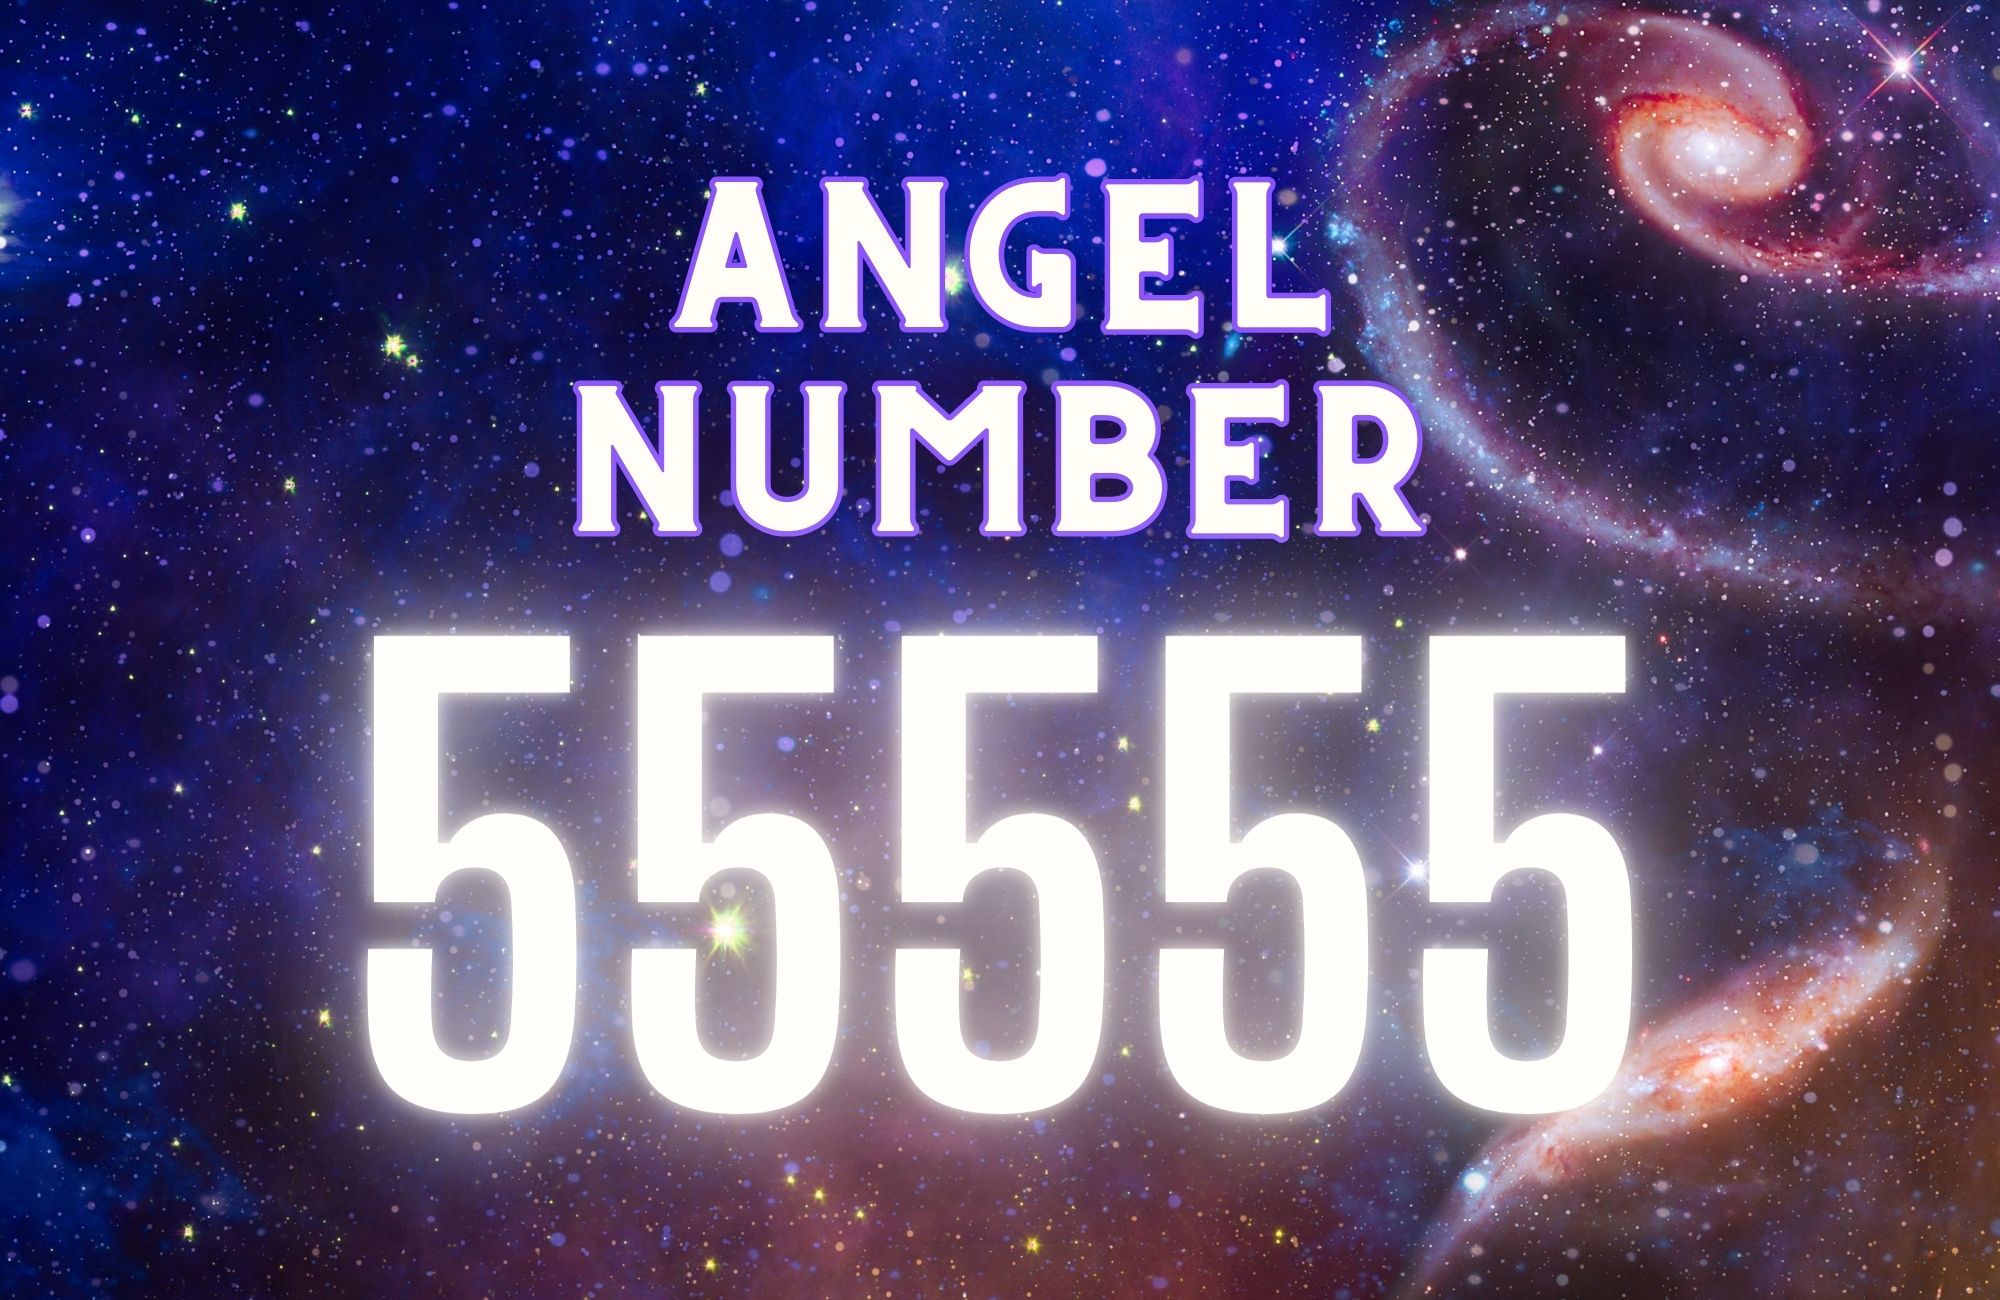 Understanding The 55555 Angel Number Meaning A Guide To Positive Change And Growth LoveInspireDestiny 